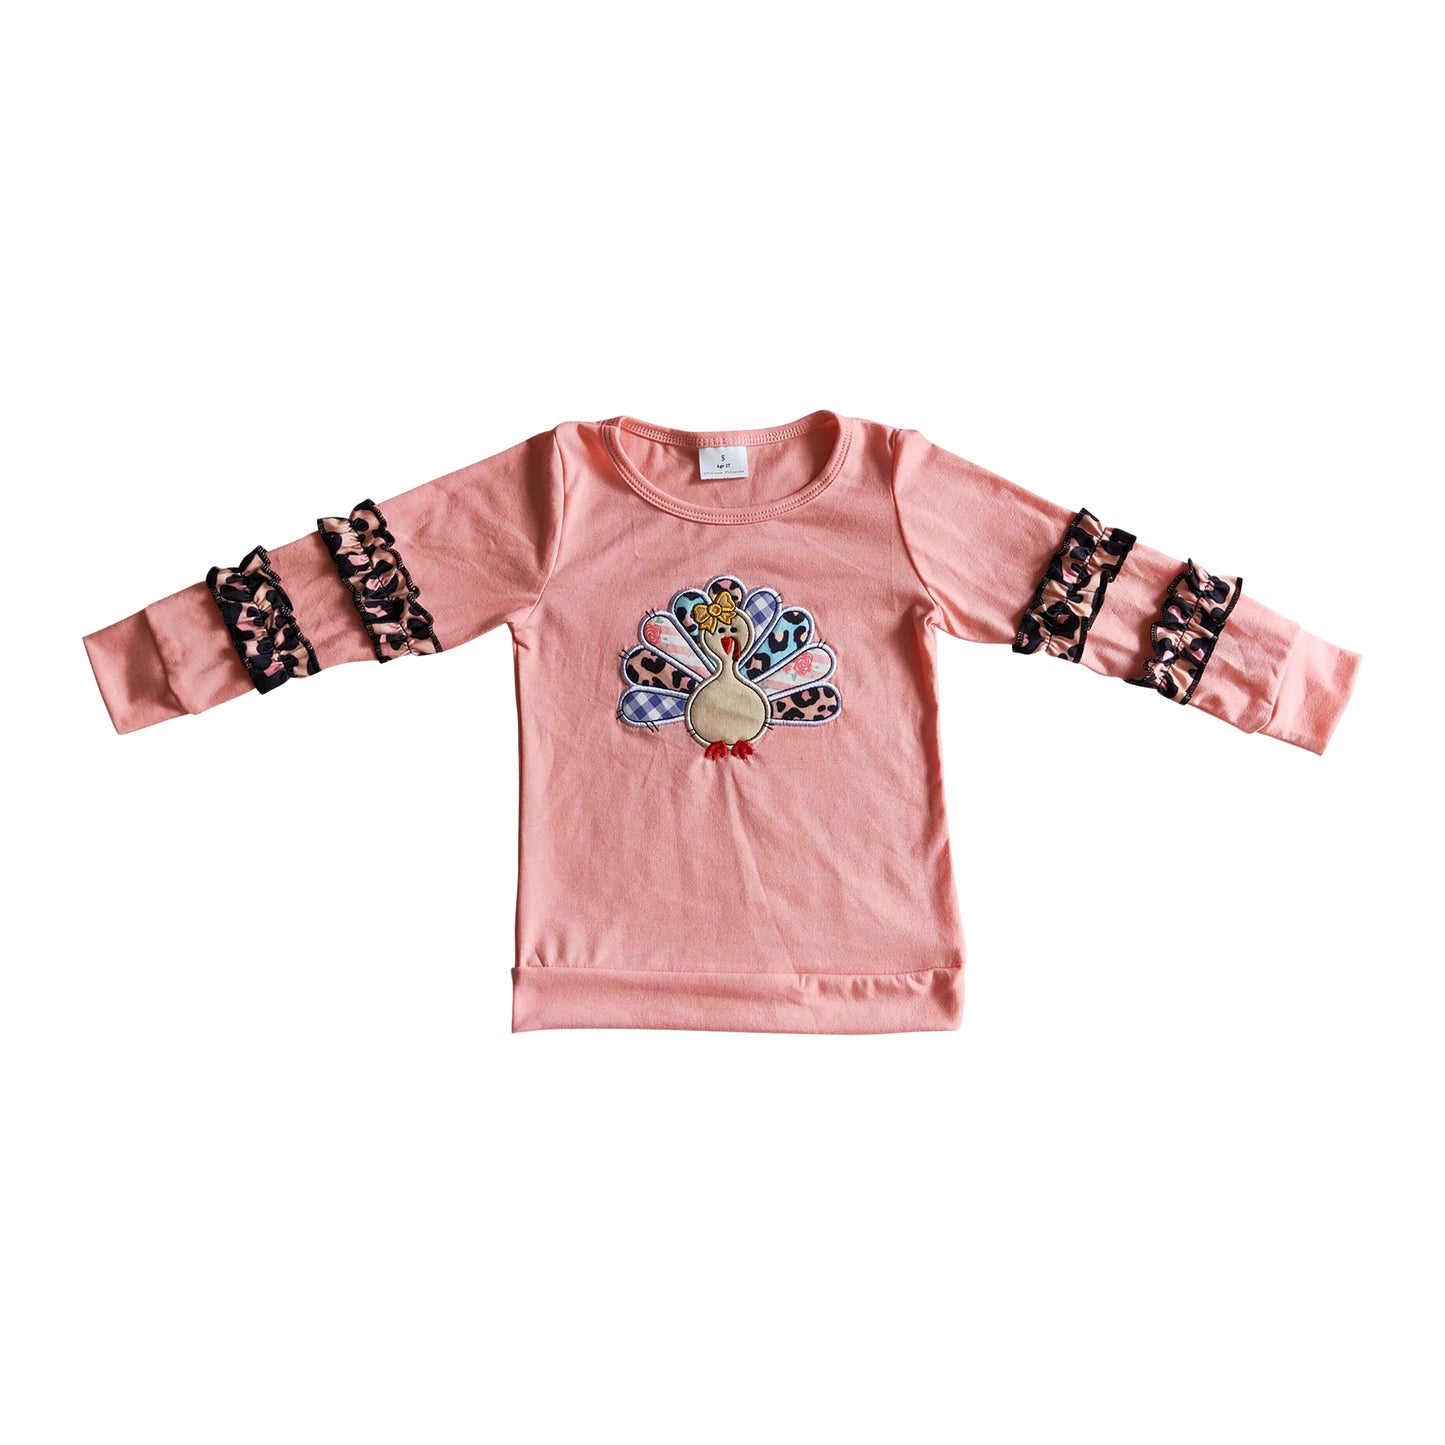 pink turkey embroidery ruffle sleeve sweater shirt girl's fall clothes